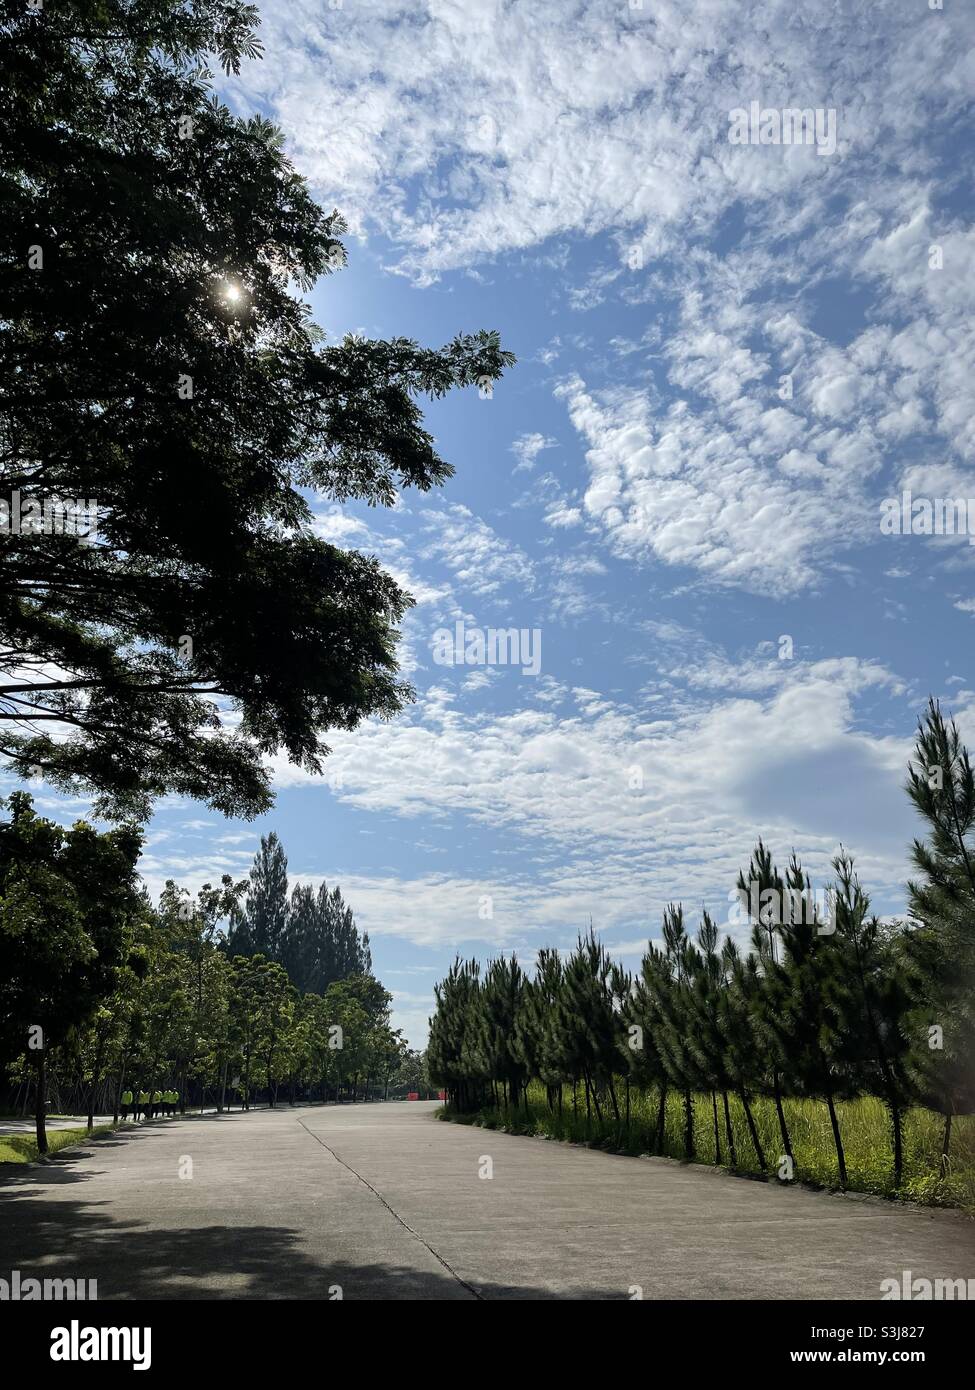 lined trees and clear blue skies Stock Photo